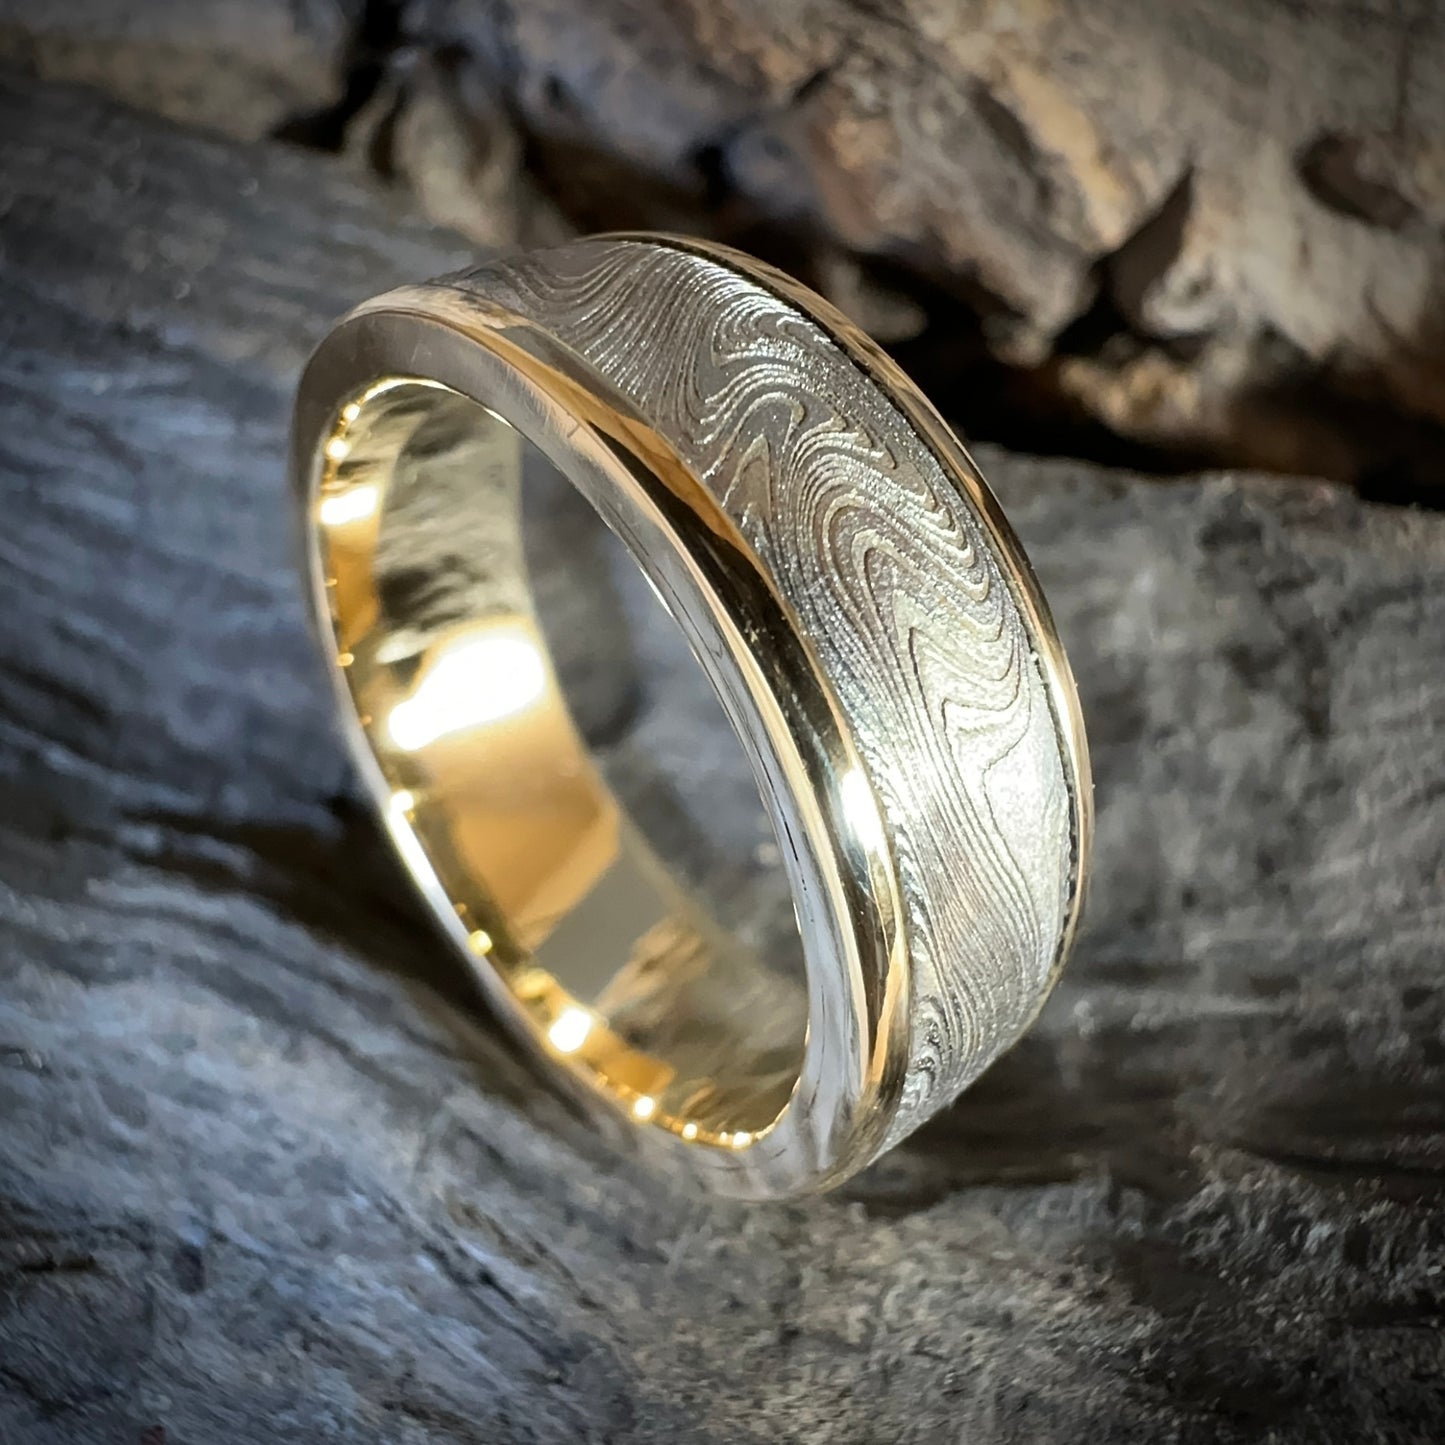 Kona Damascus Steel Ring with 9ct Gold Core